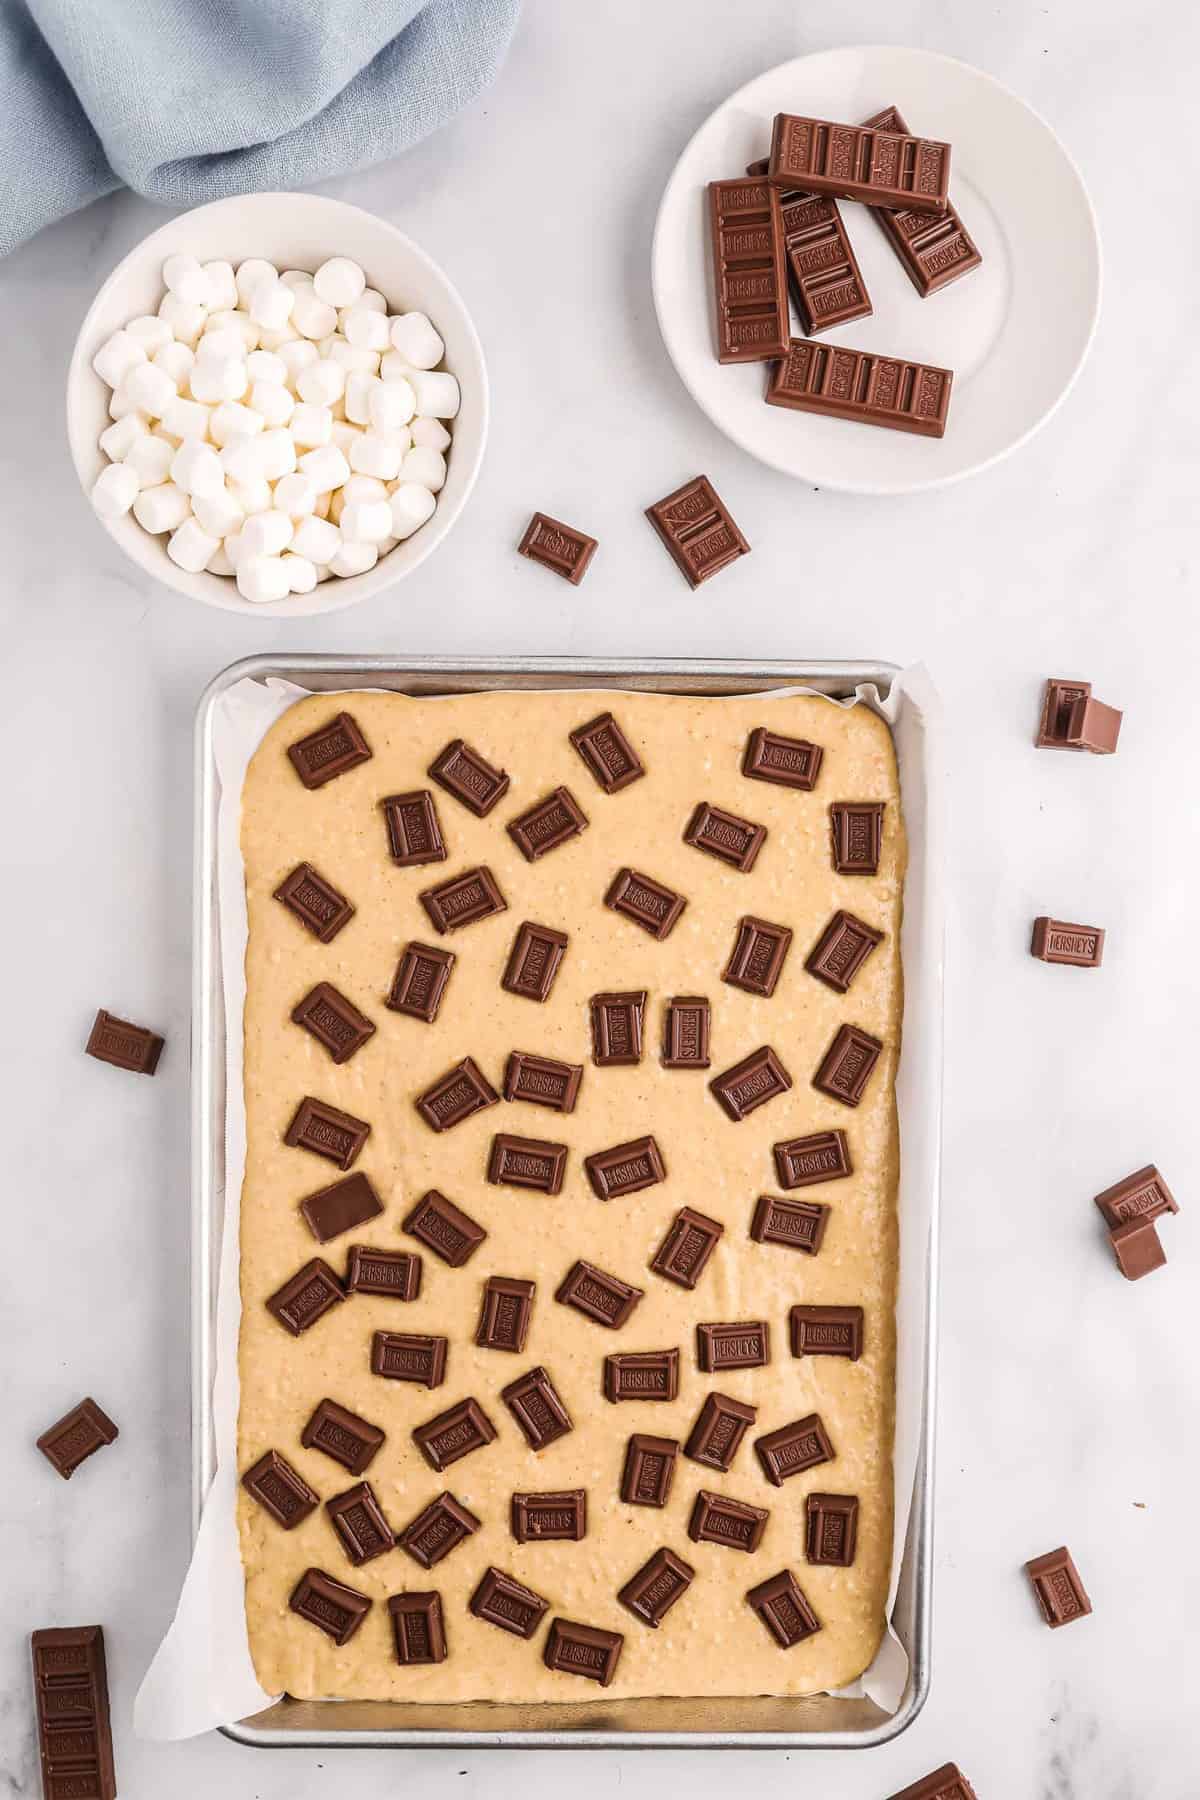 Unbaked sheet pan pancake topped with small candy bars.